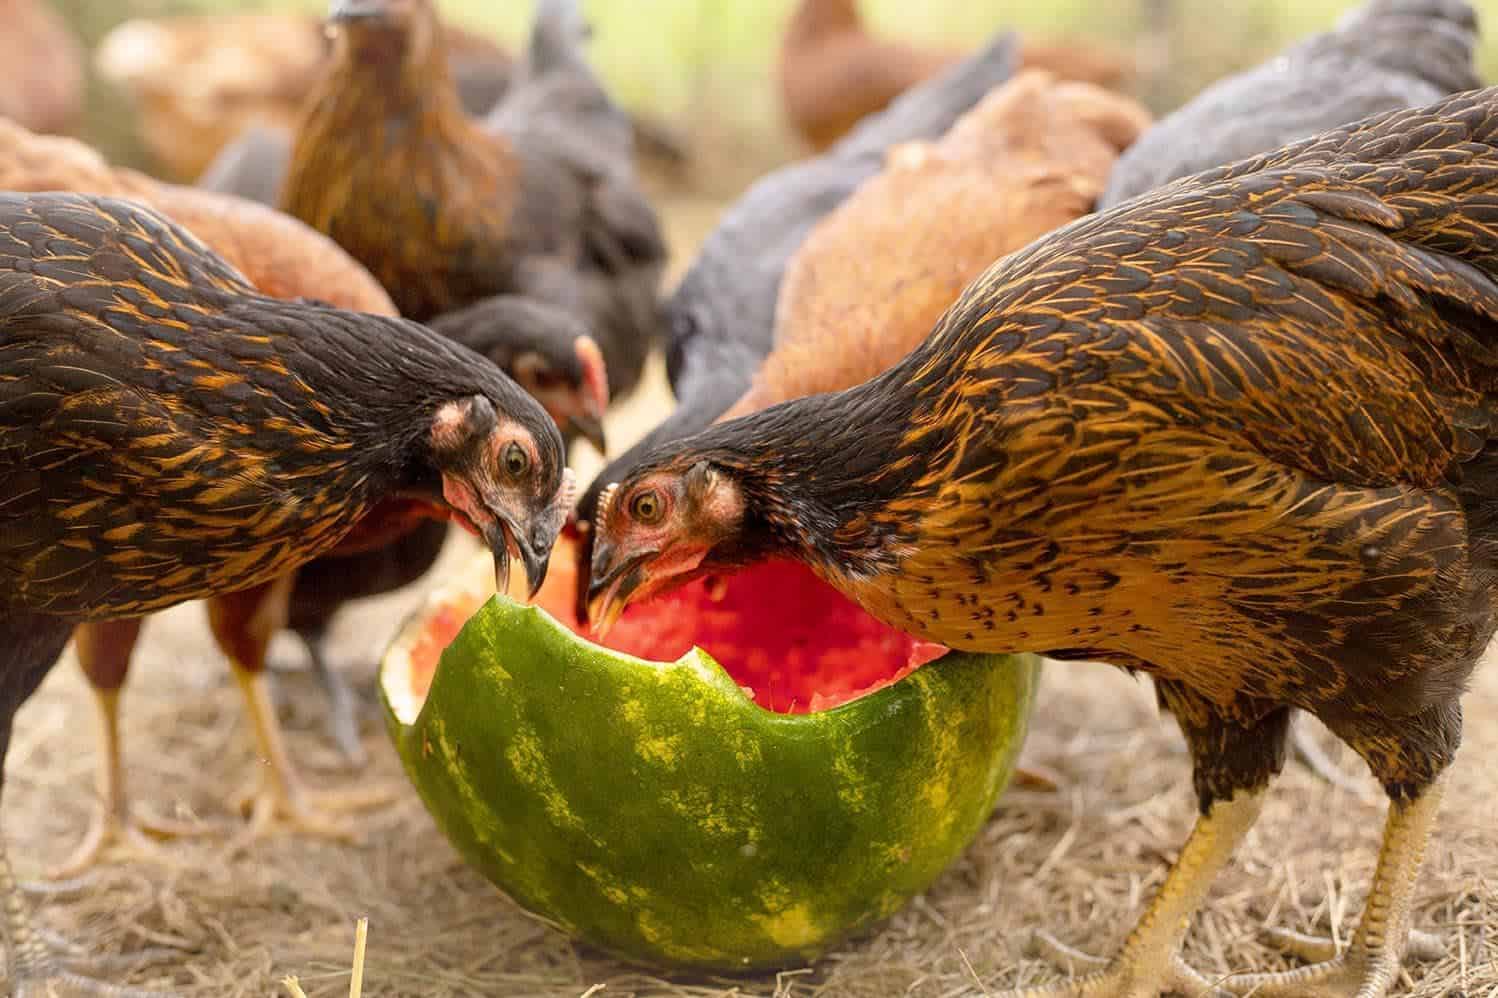 chickens eating watermelon rind